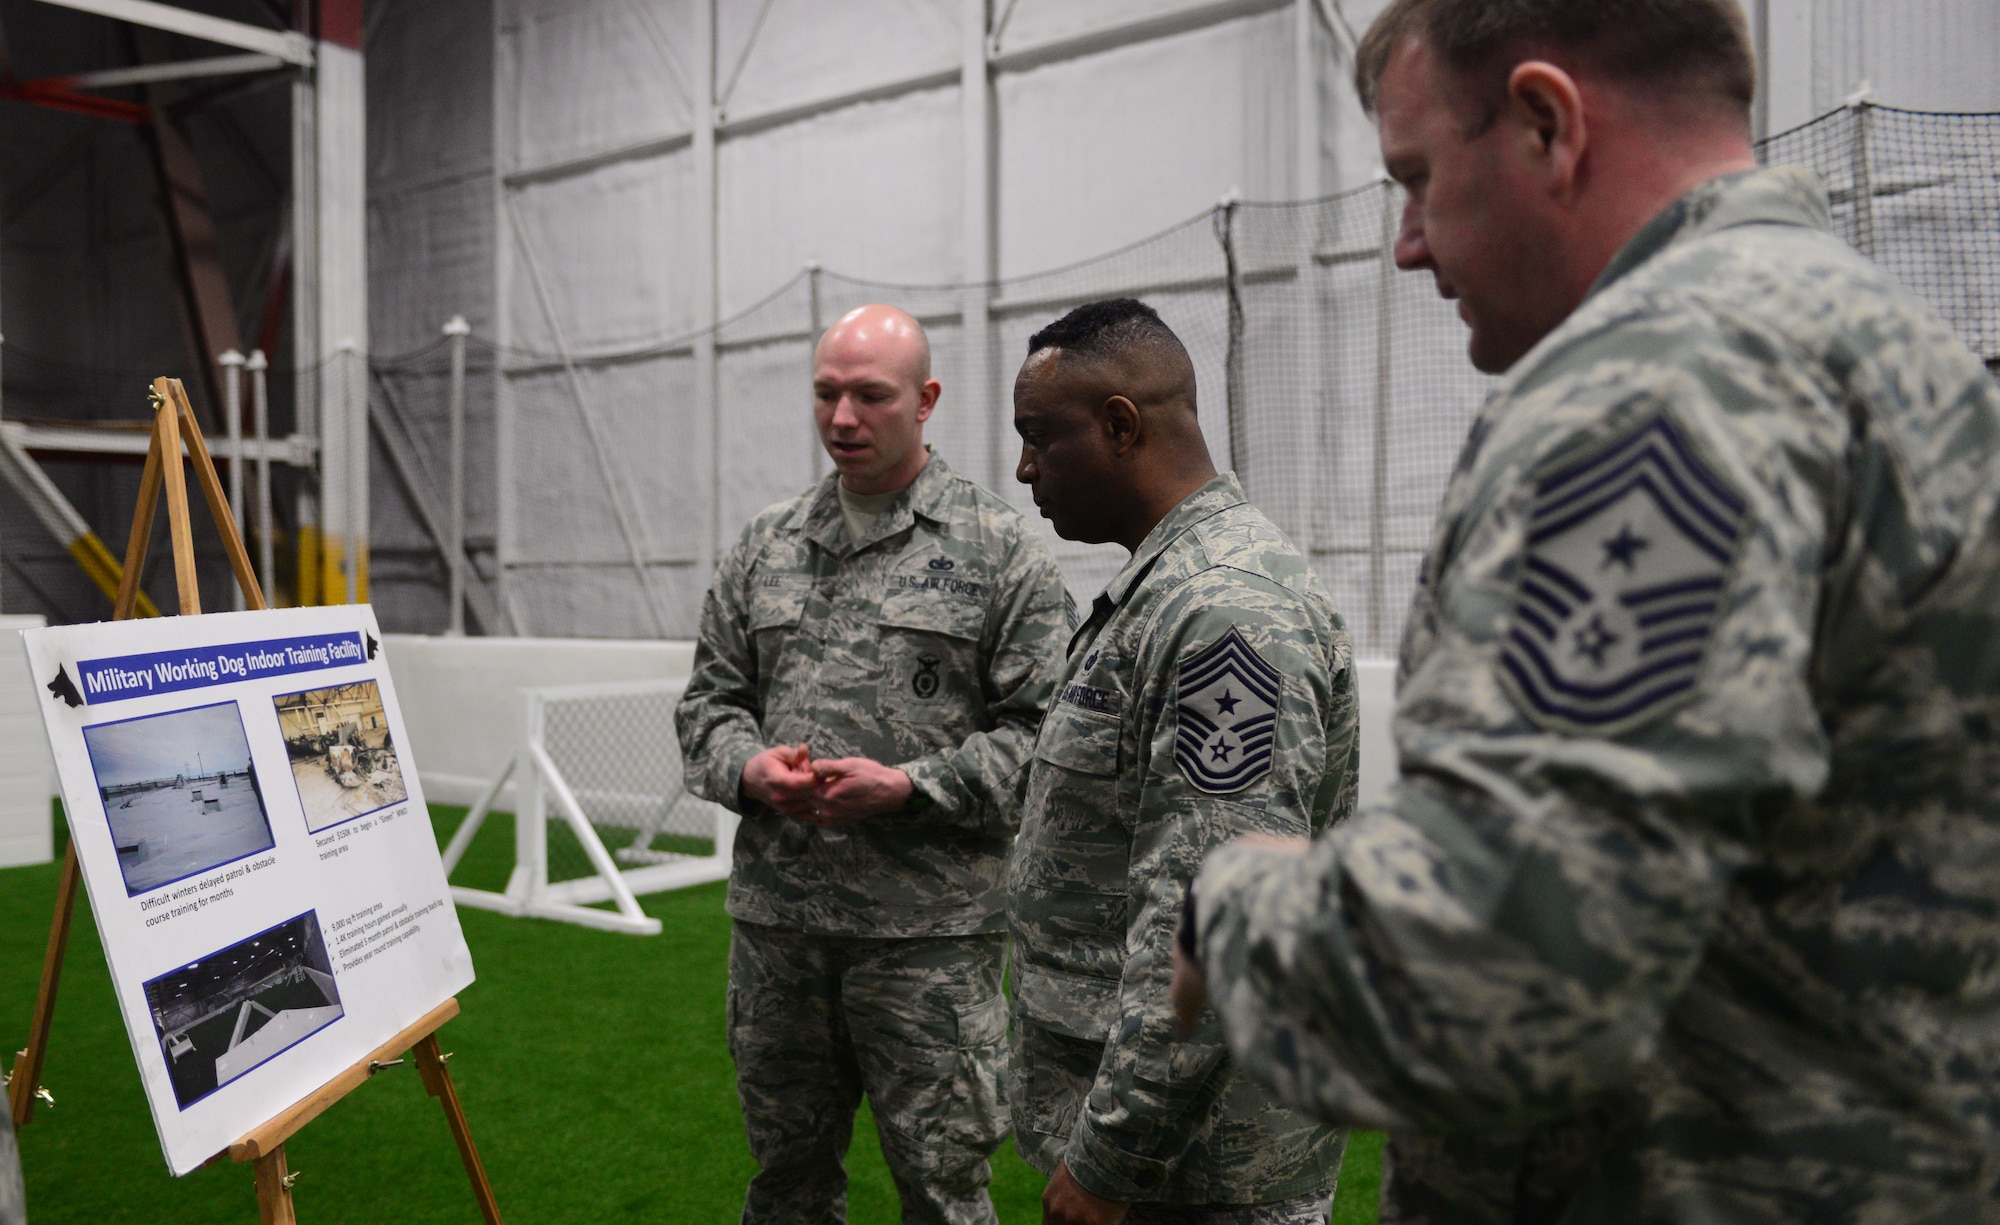 Technical Sgt. Matthew Lee, kennel master assigned to the 28th Security Forces Squadron, talks about the specifics of the indoor military working dog facility to Chief Master Sgt. Calvin Williams, Air Force Global Strike Command command chief, and Chief Master Sgt. Adam Vizi, 28th Bomb Wing command chief, during a visit to Ellsworth Air Force Base, S.D., March 2, 2017. The indoor facility is unique to Ellsworth as the only one of its kind in AFGSC. (U.S. Air Force photo by Airman 1st Class Denise M. Jenson)